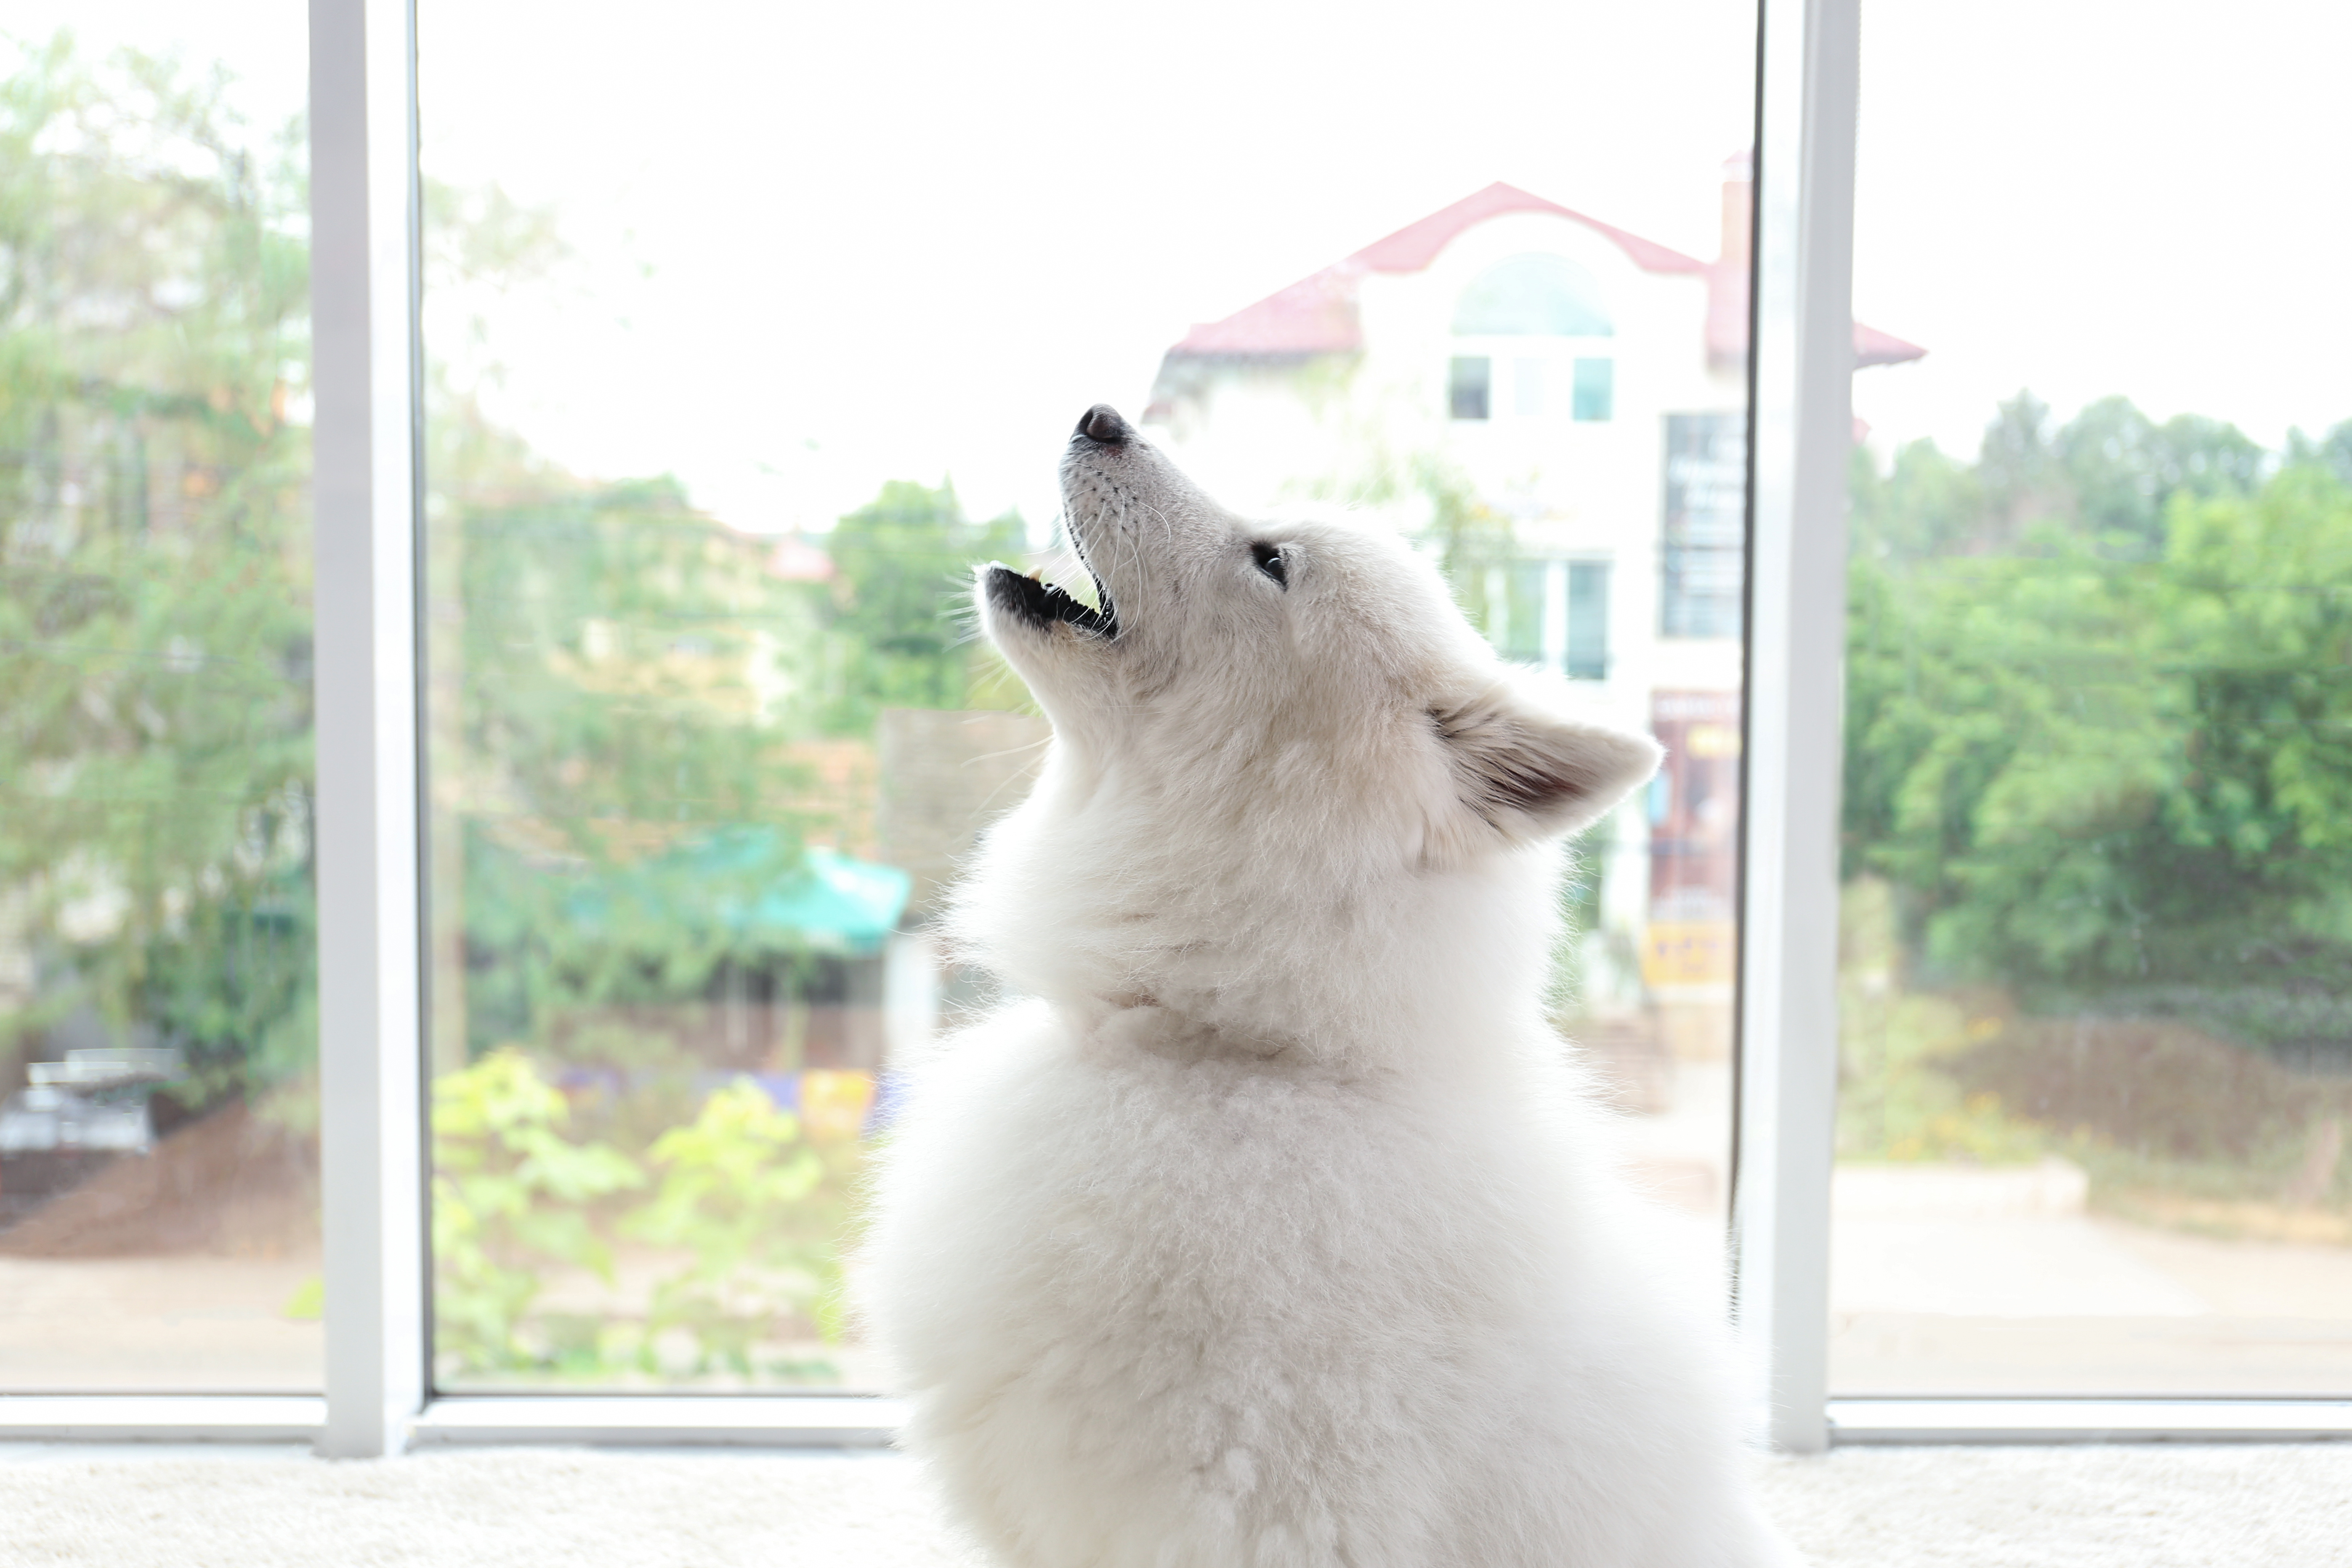 A fluffy white dog howling in front of a window - looking for dog training in Mesa, AZ? Contact Dog Training Elite today!.